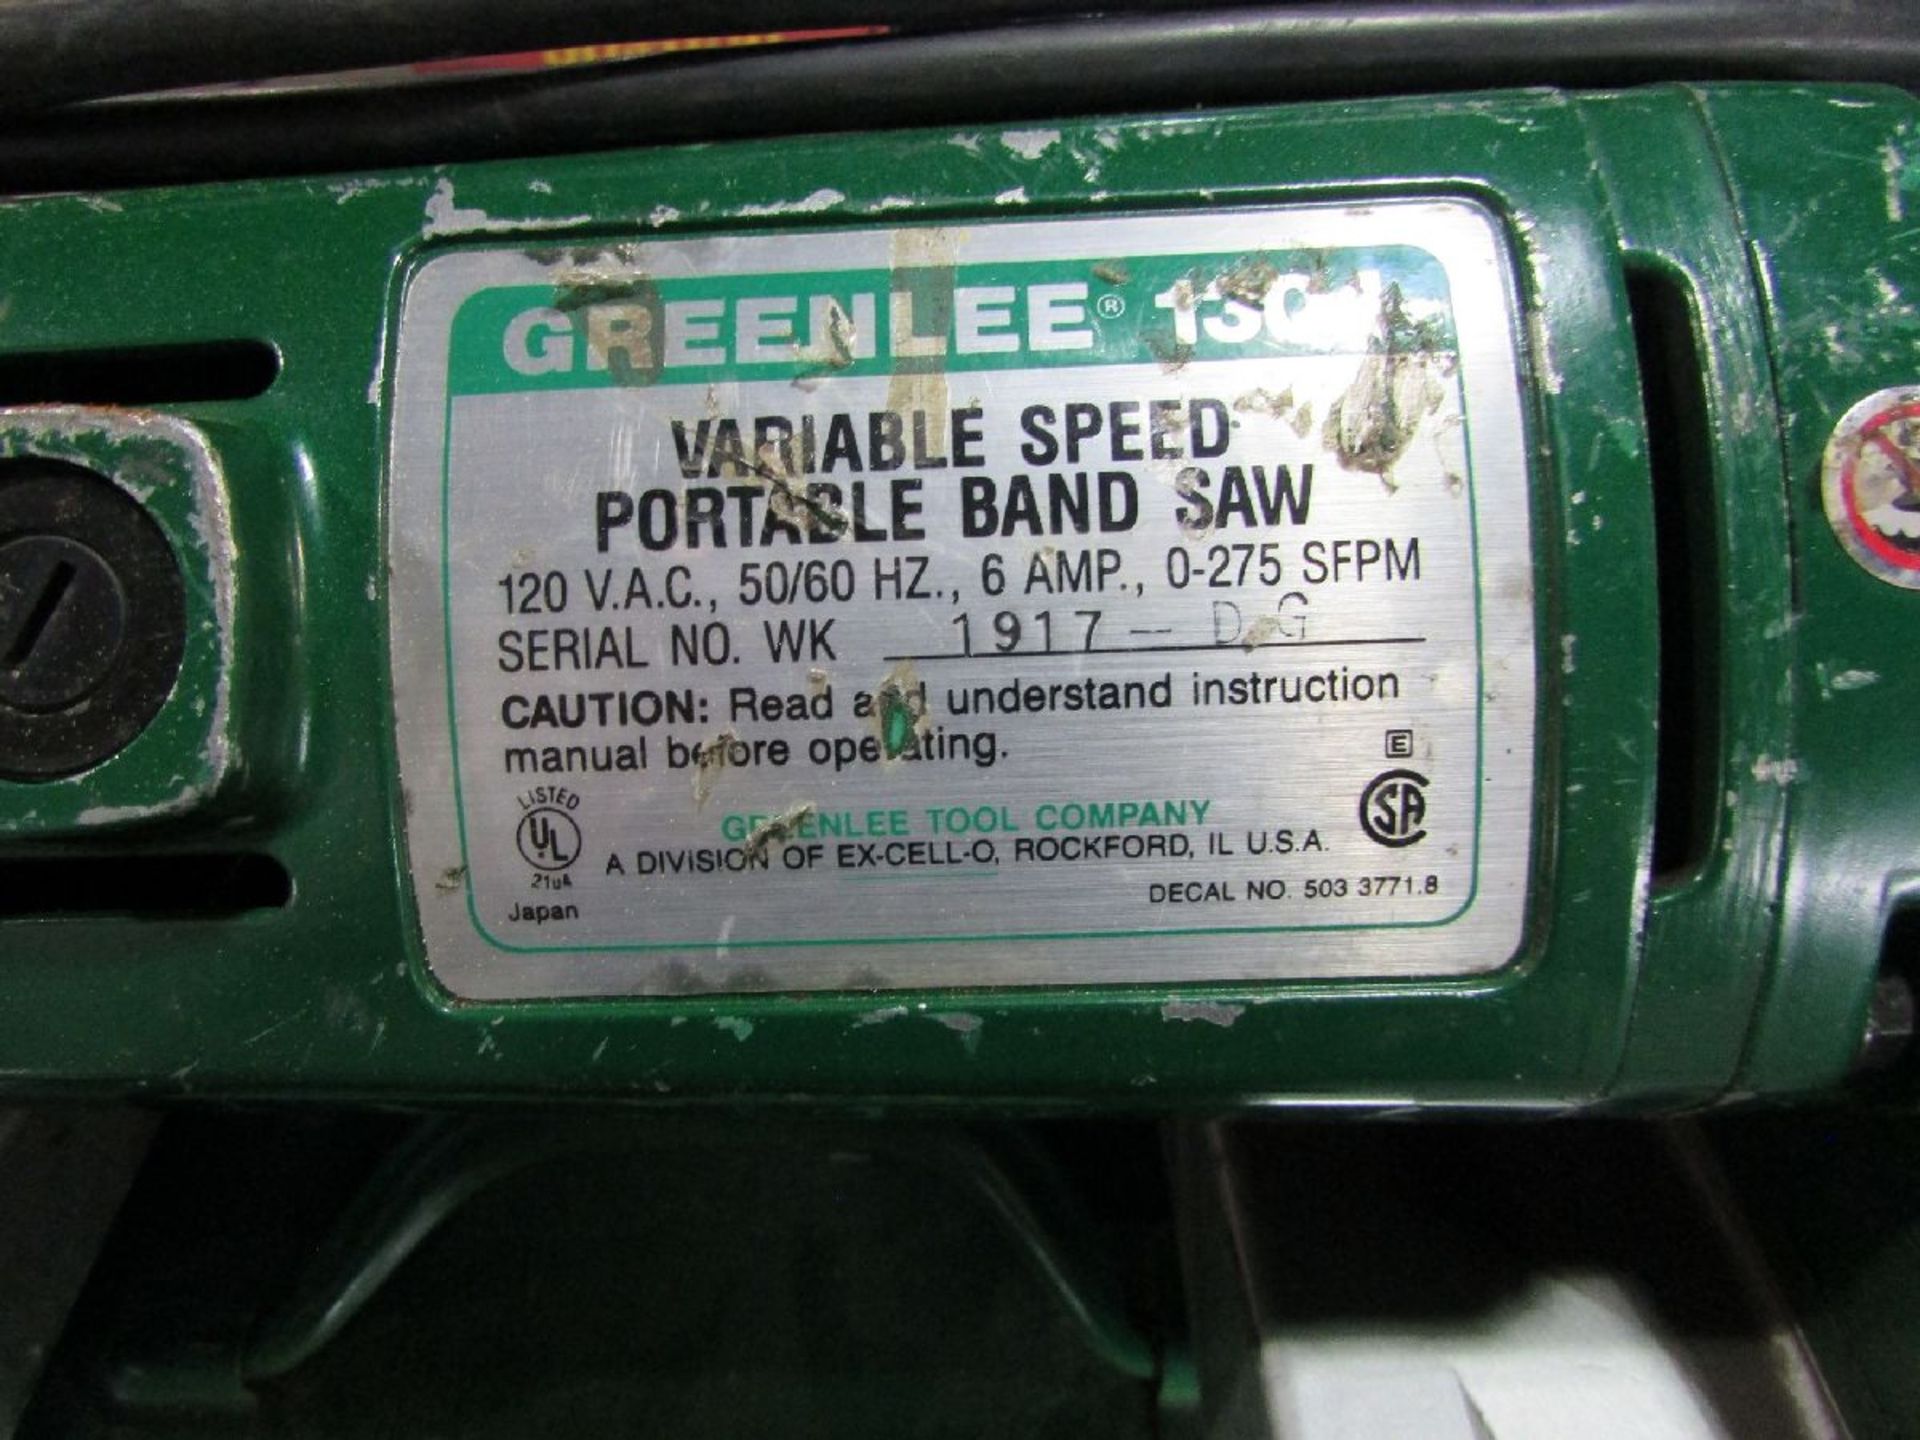 Greenlee Model 1304 Heavy Duty VS Electric Portable Band Saw - Image 3 of 3